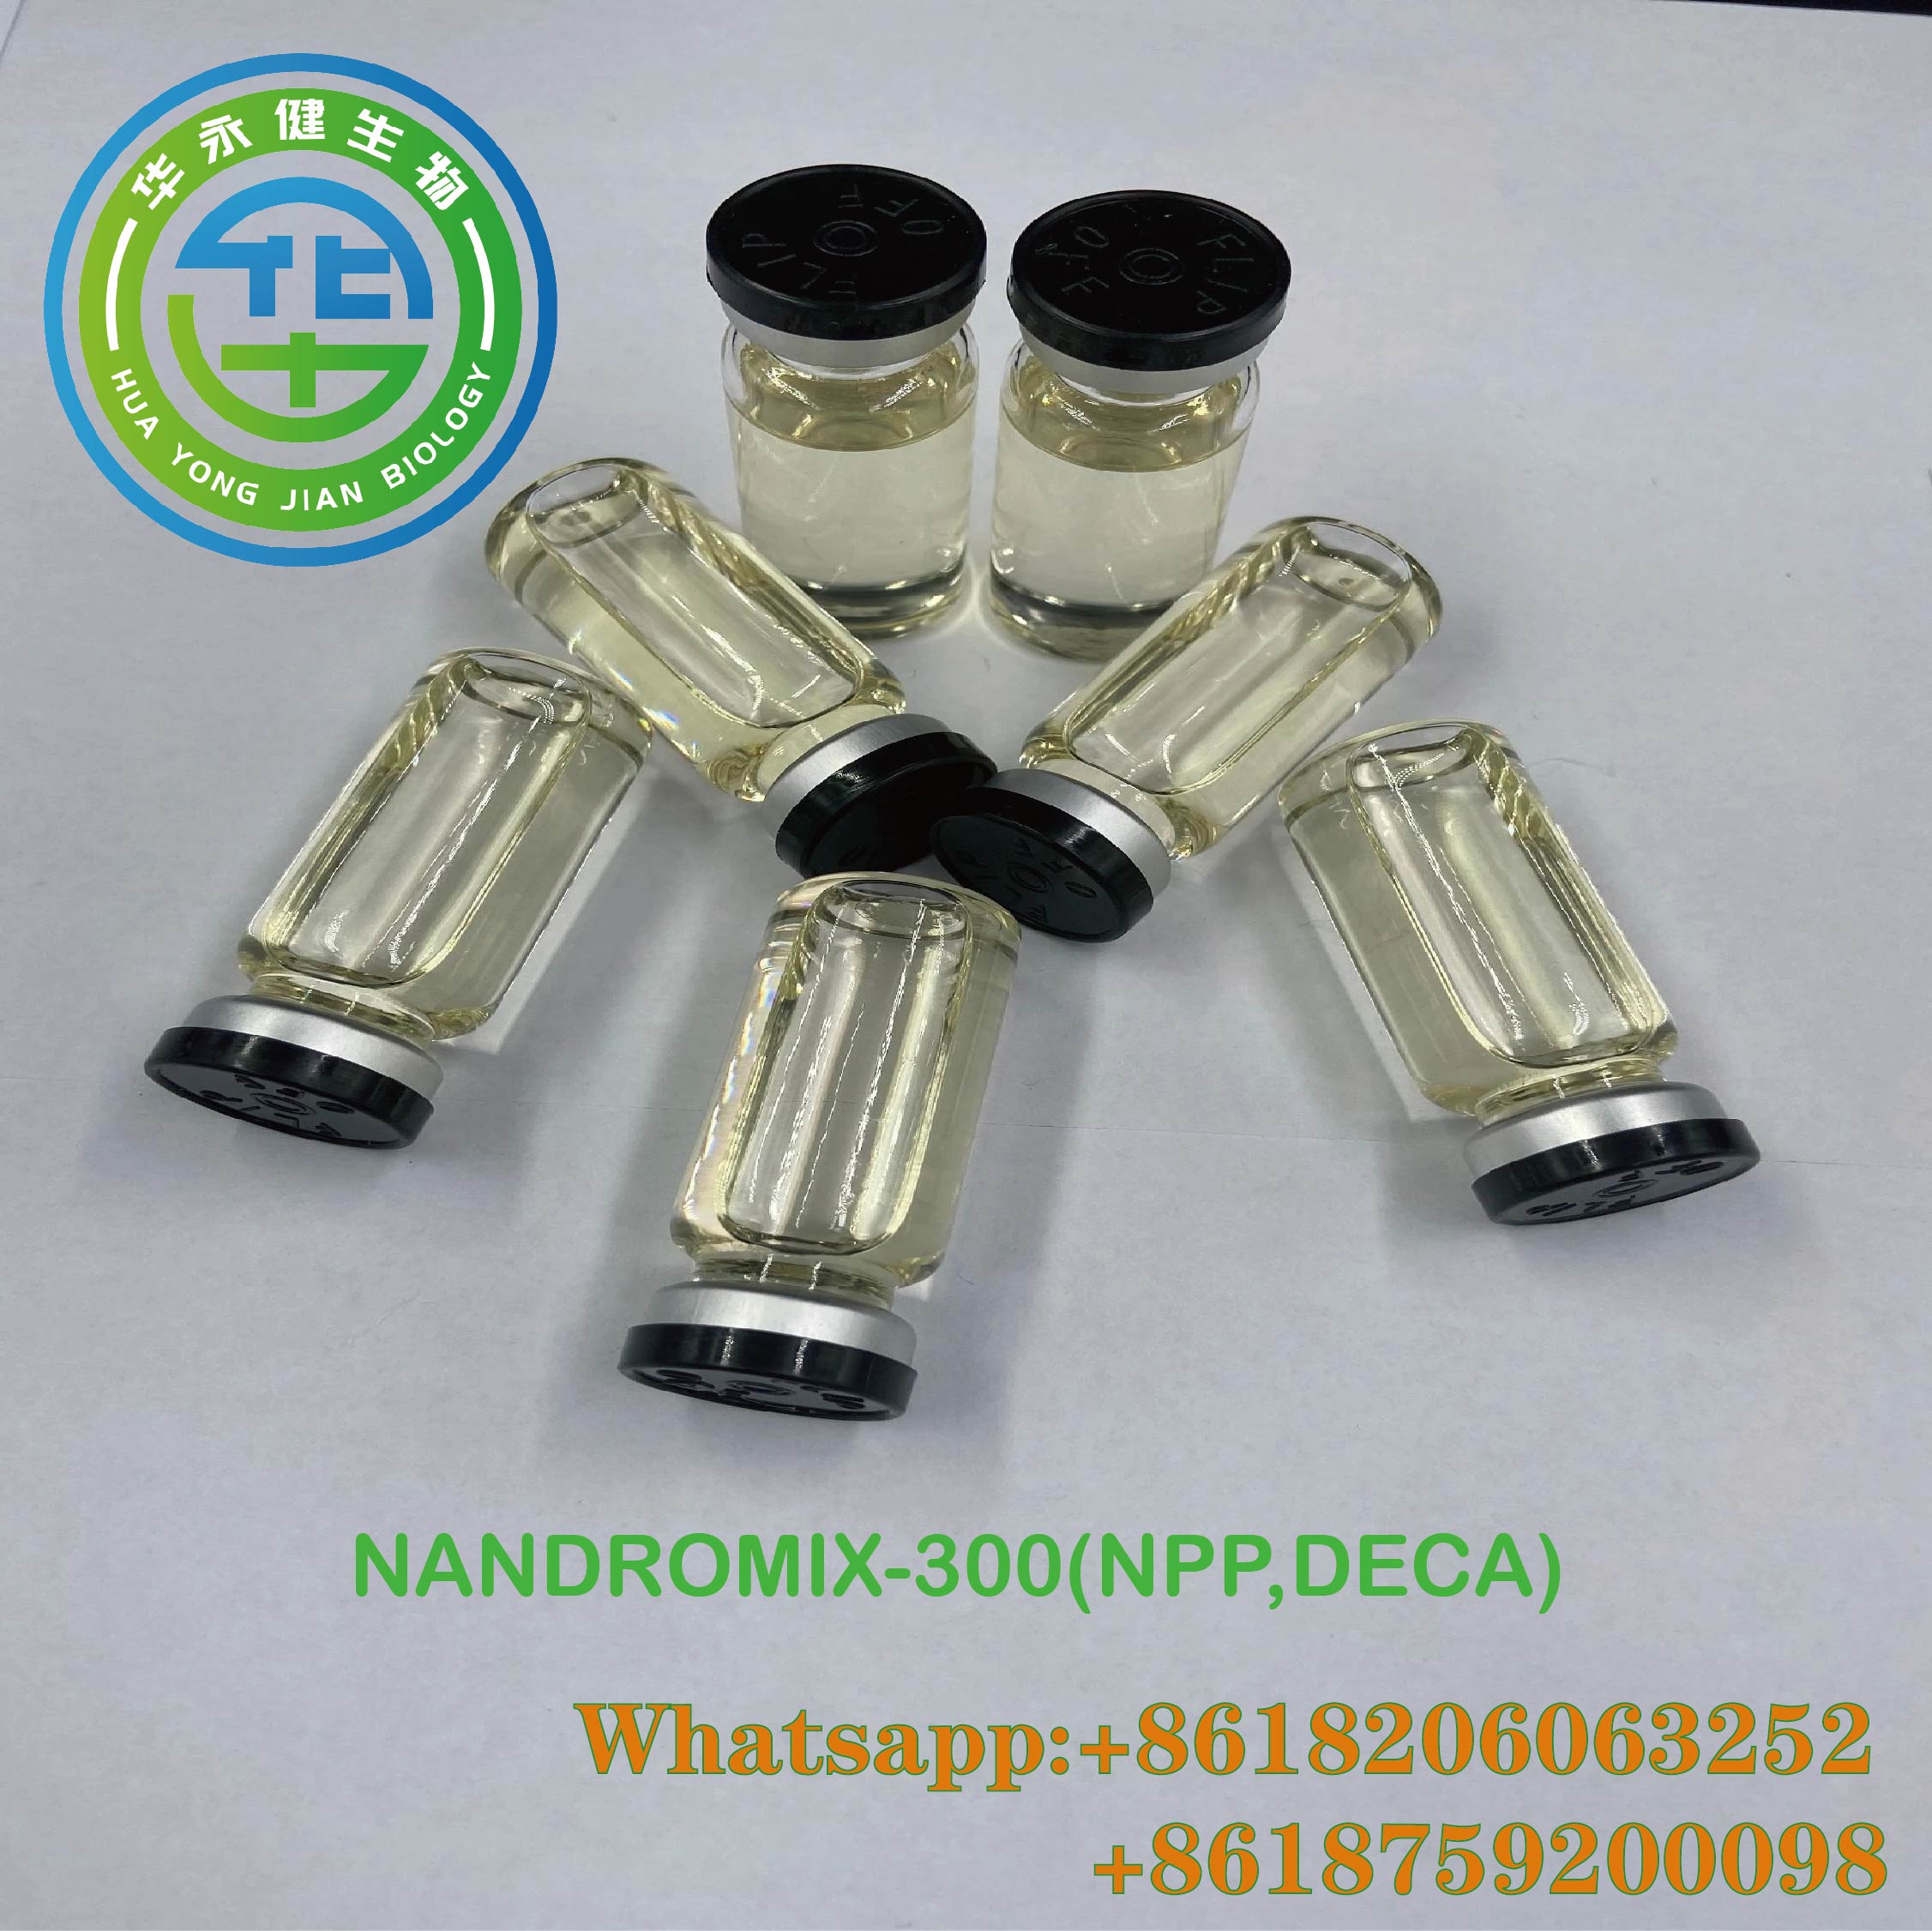 China Factory Supply NANDROMIX-300(NPP,DECA) Steroids Oils 300mg/ml